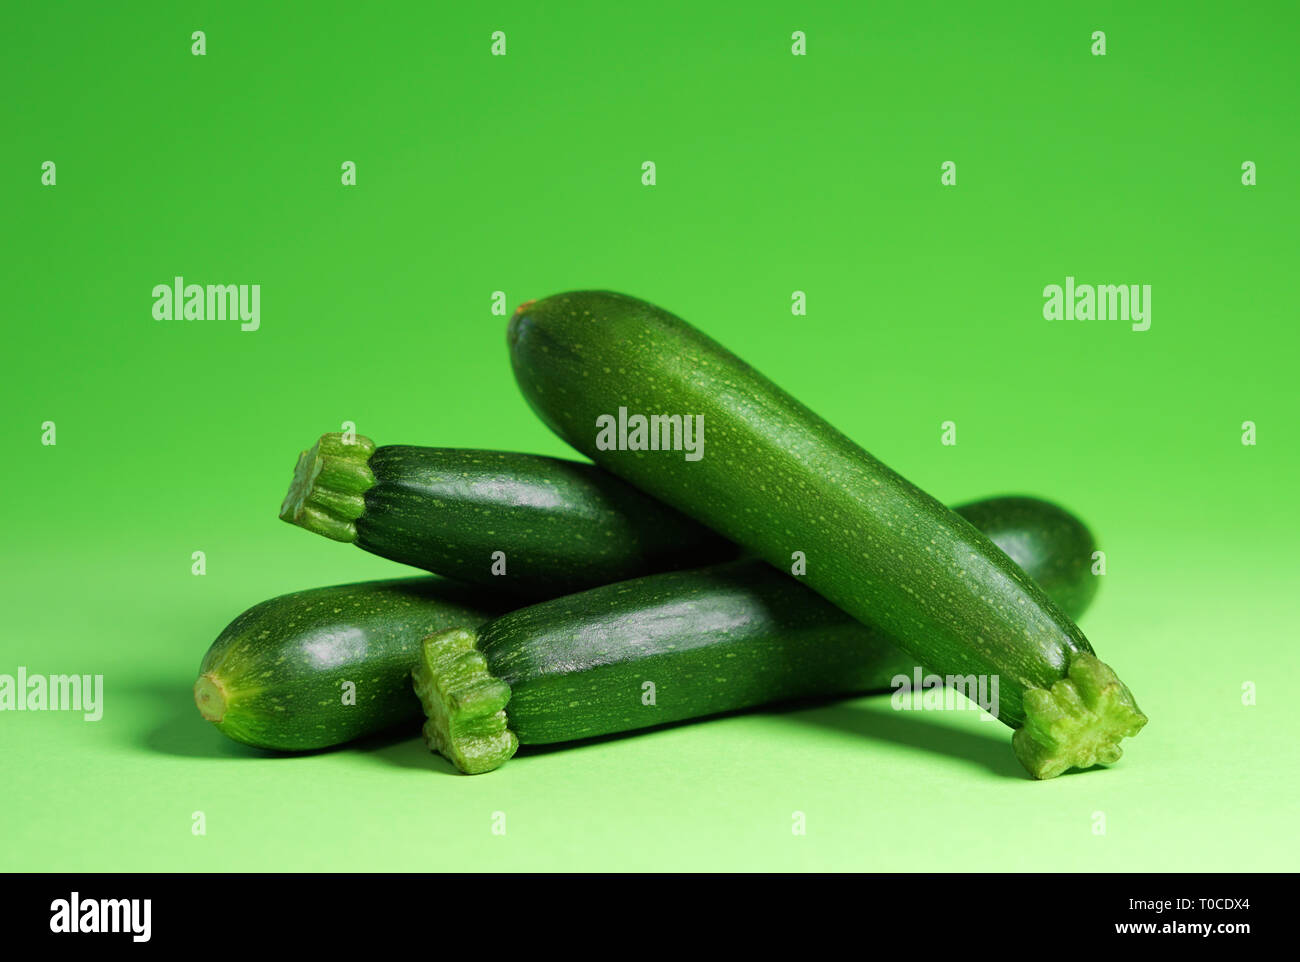 Zucchini vegetables portrait concept with four fresh organic baby zucchini close up view on green background with copy space. Stock Photo